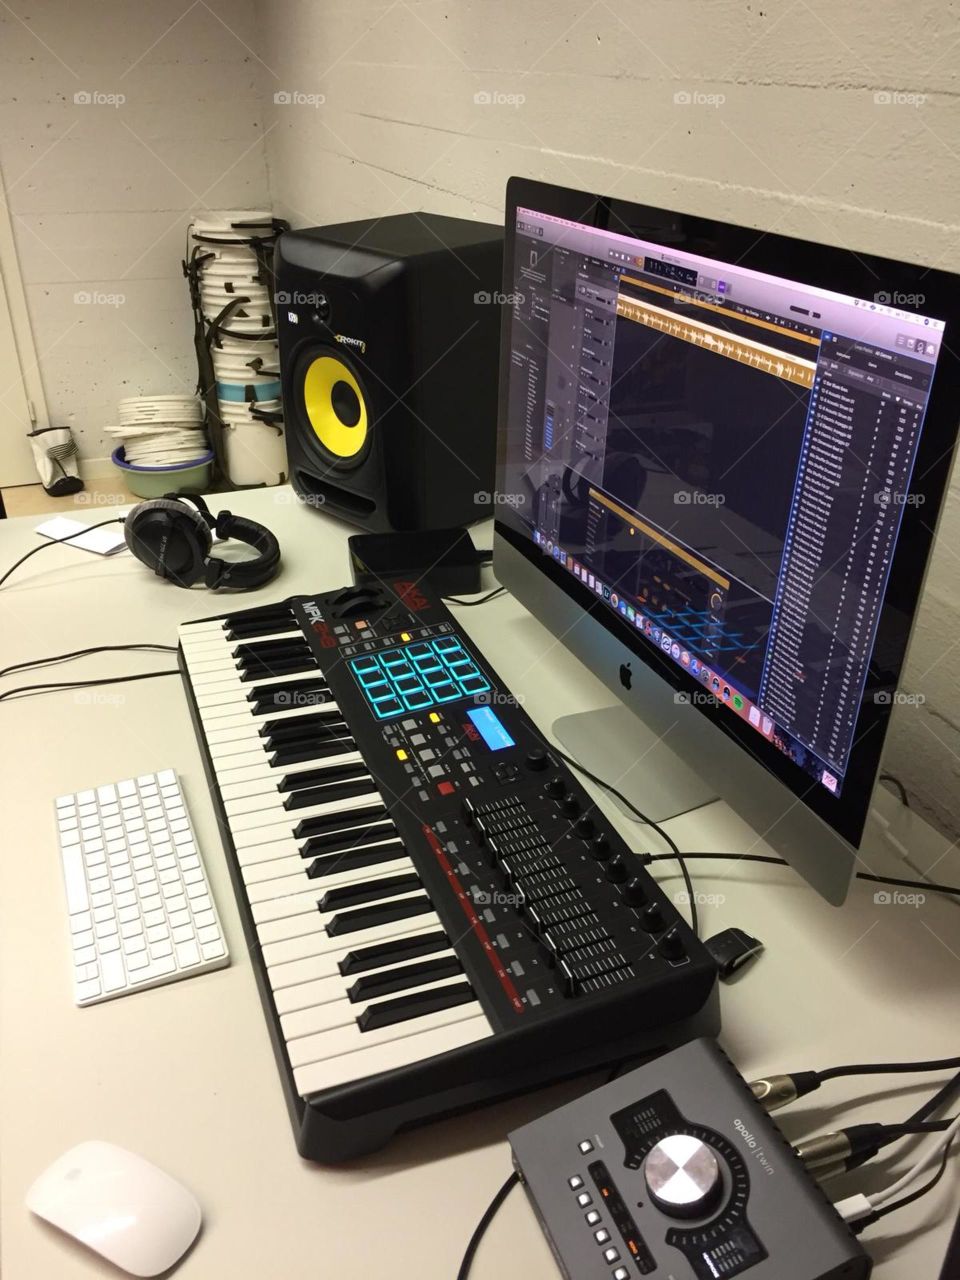 this is how it looks in basic music studio when you do it at home bud have a bit of money with friends to develope it at least